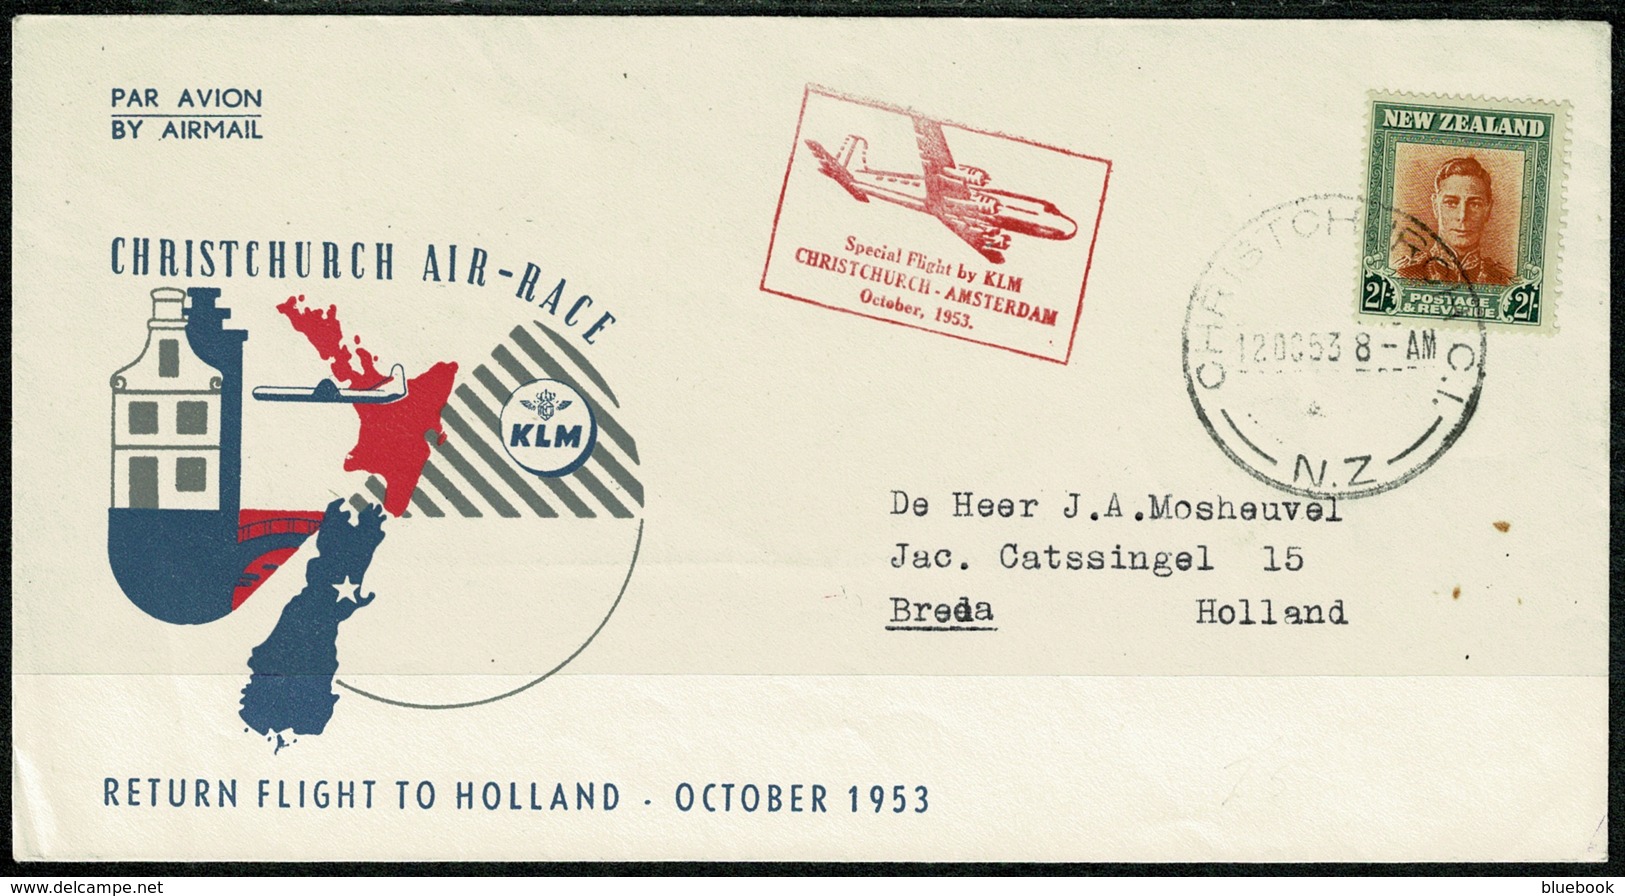 Ref 1301 - 1953 KLM Christchurch New Zealand Air Race - Reurn Flight To Holland - Aviation - Covers & Documents